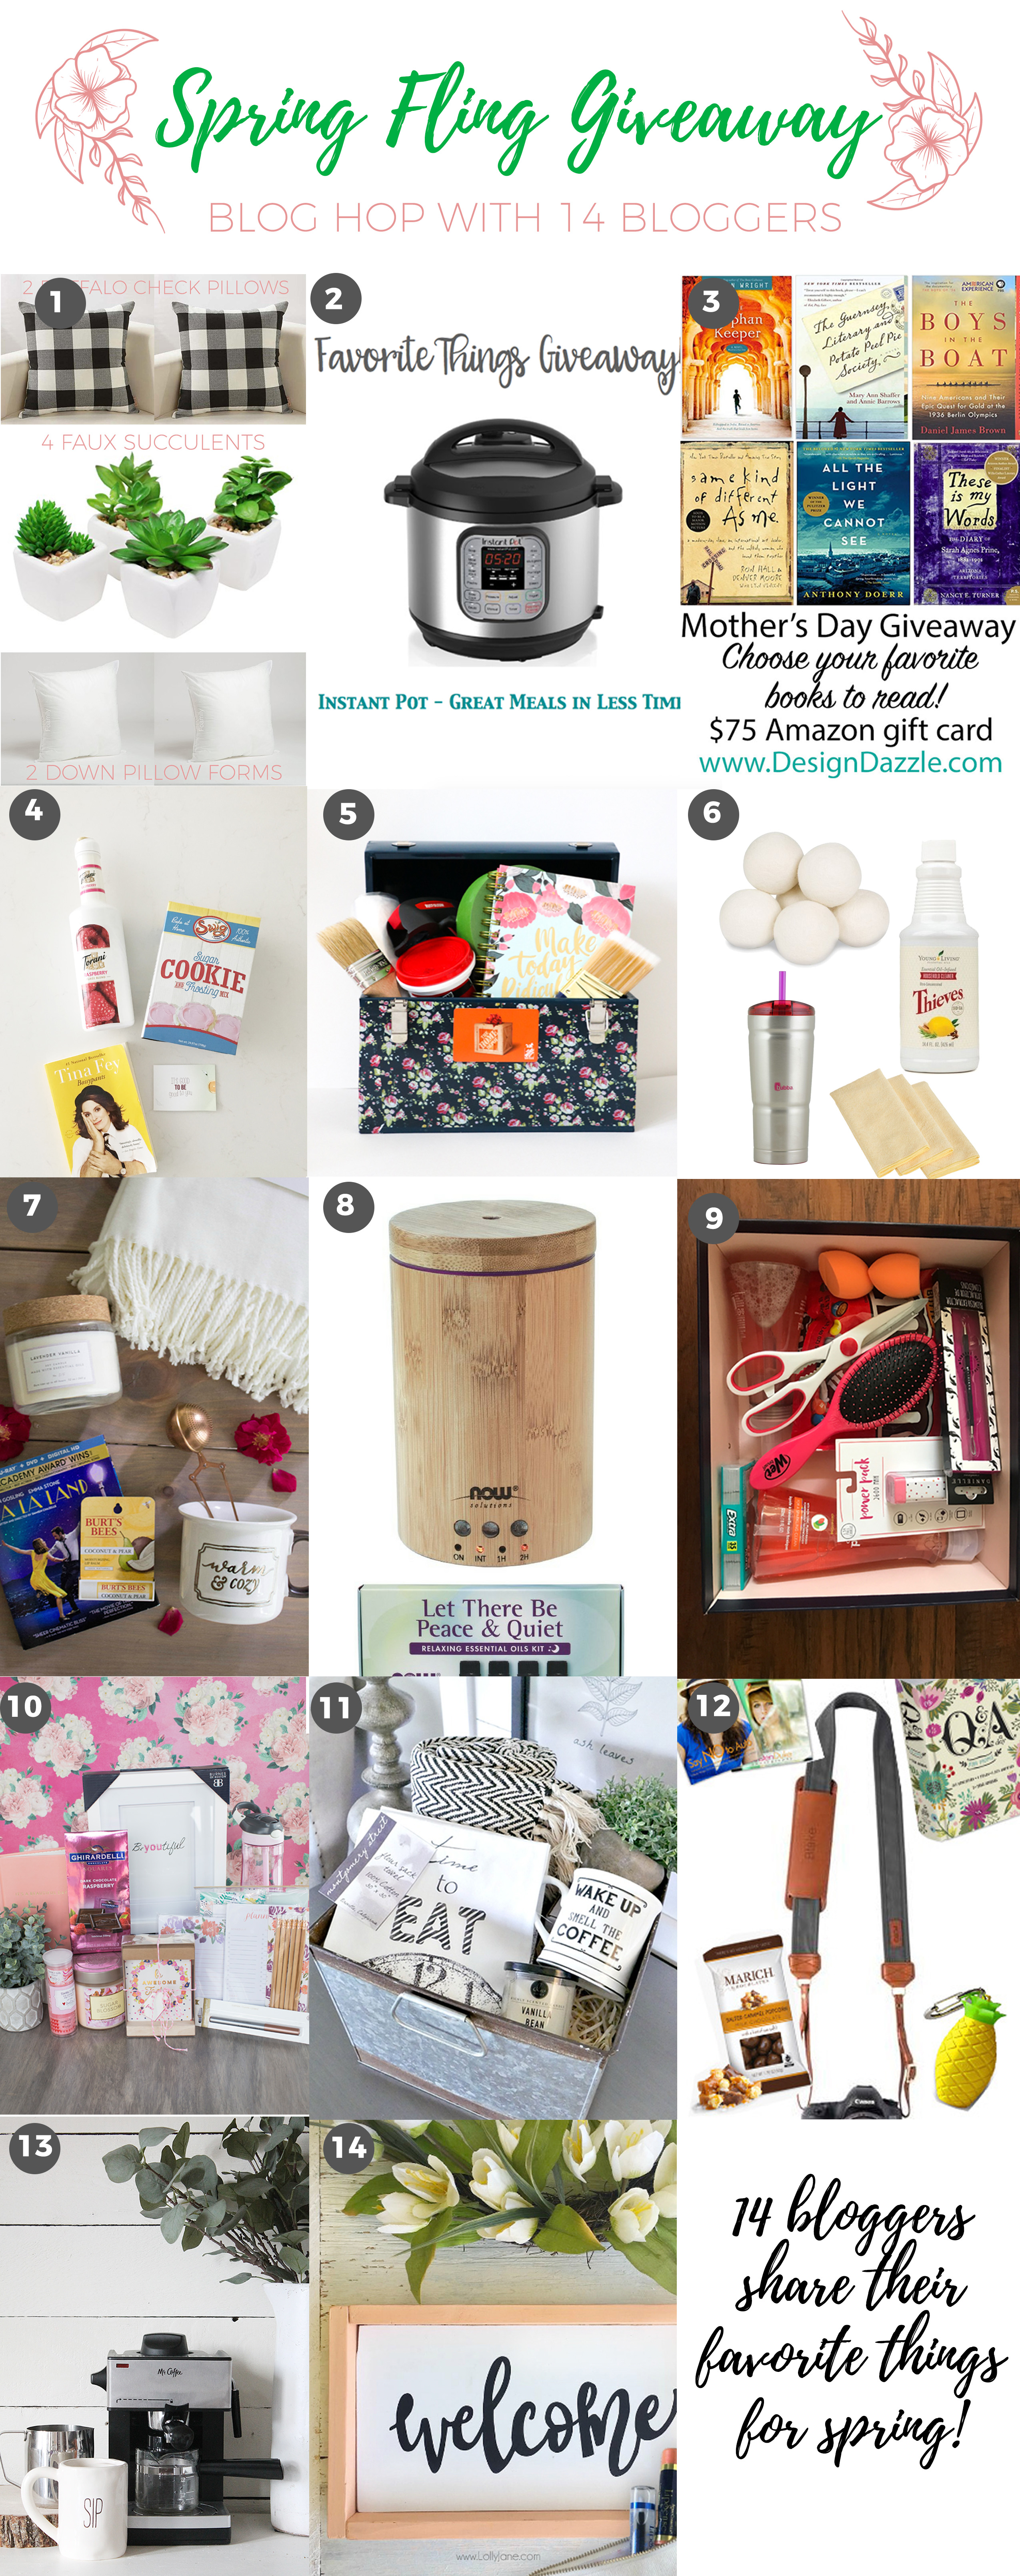 spring fling giveaway collage Gift Ideas for Mother's Day + Spring Cleaning Giveaway 1 spring cleaning giveaway